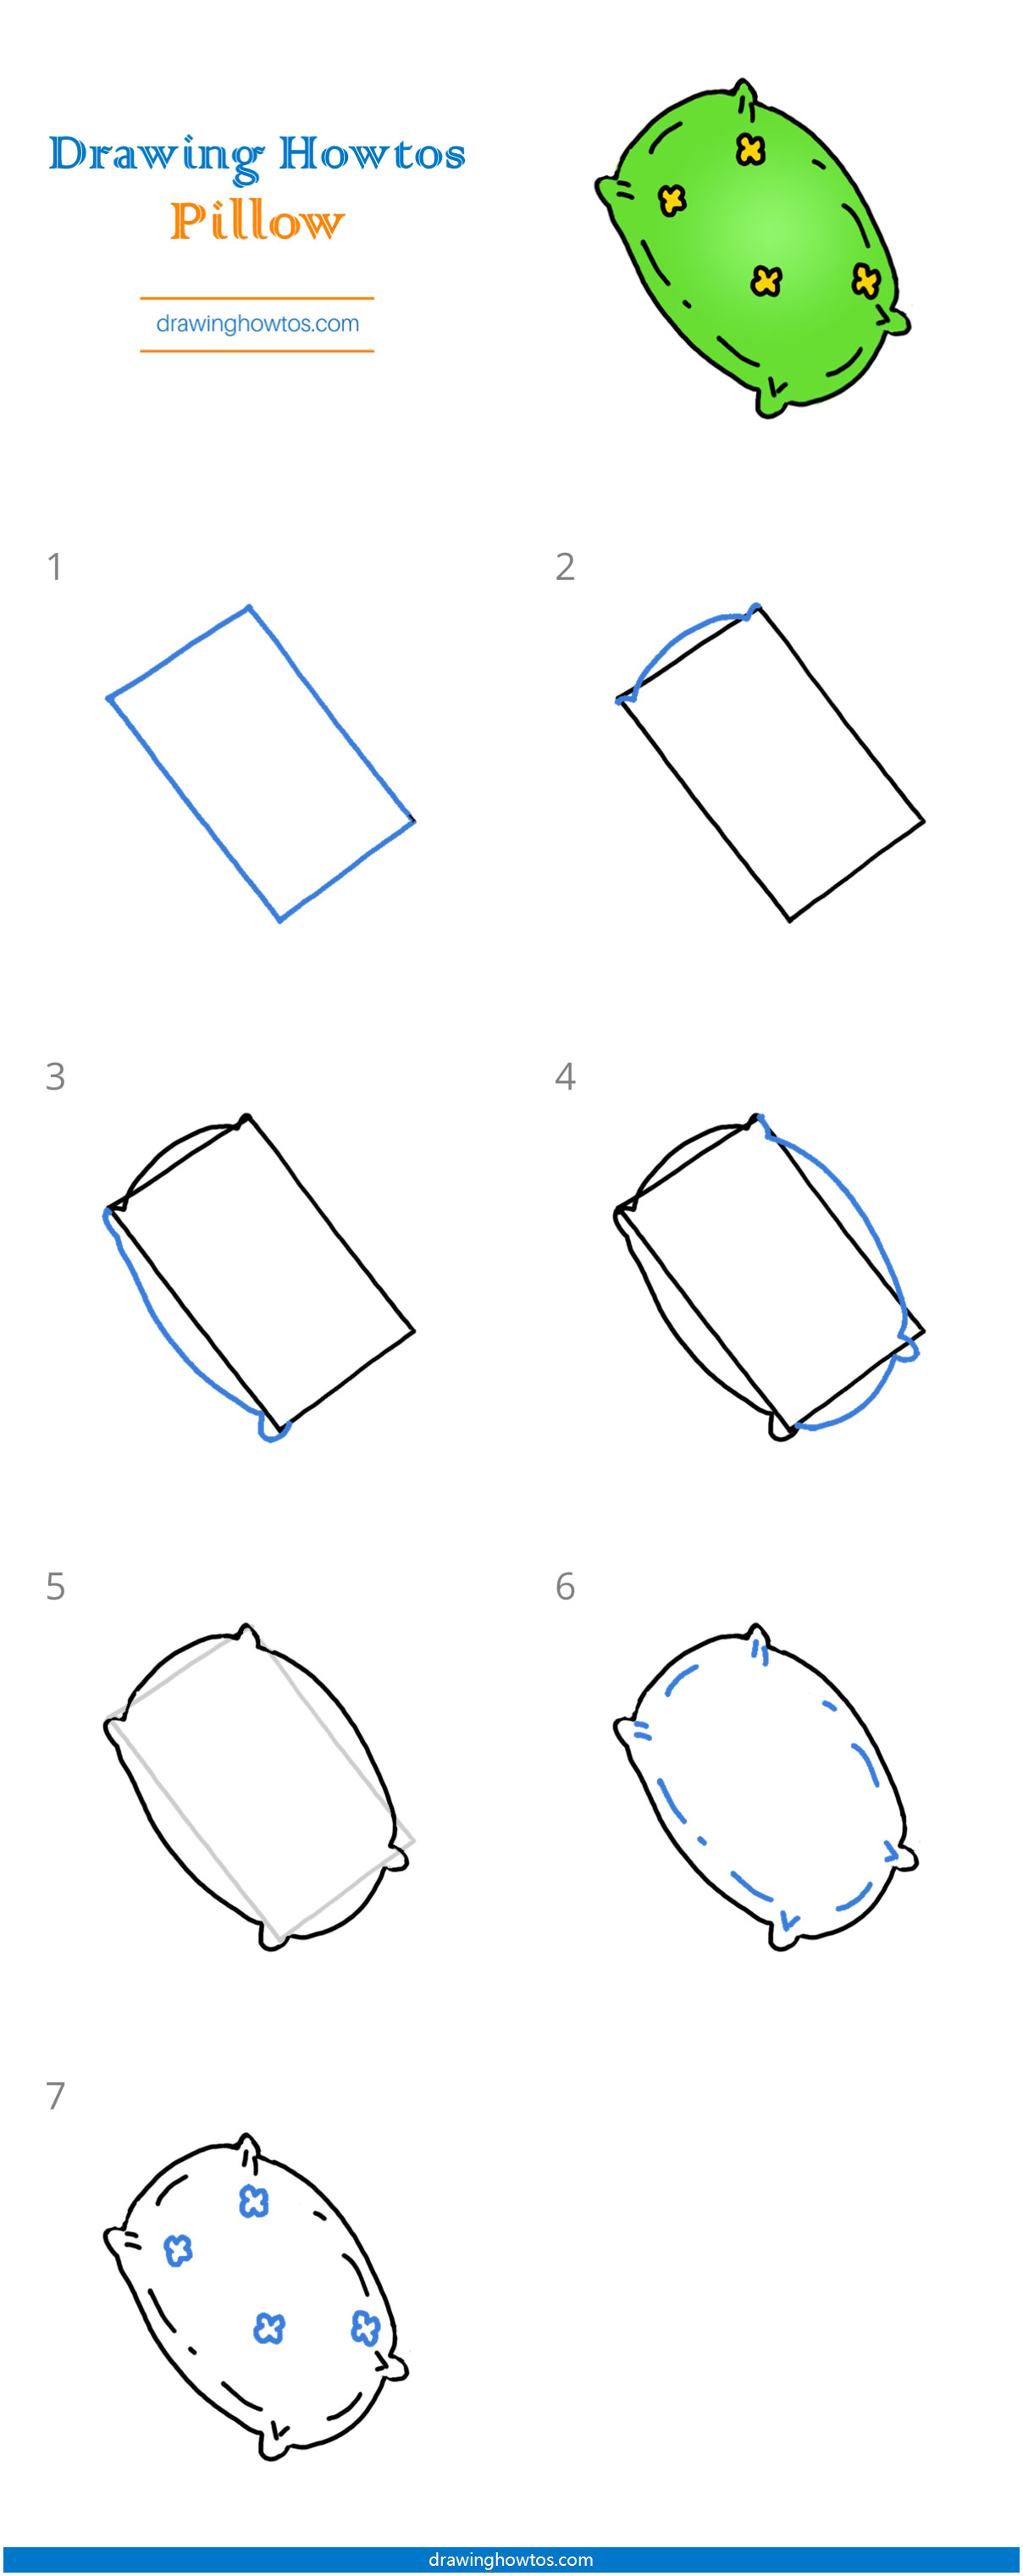 How to Draw a Pillow Step by Step